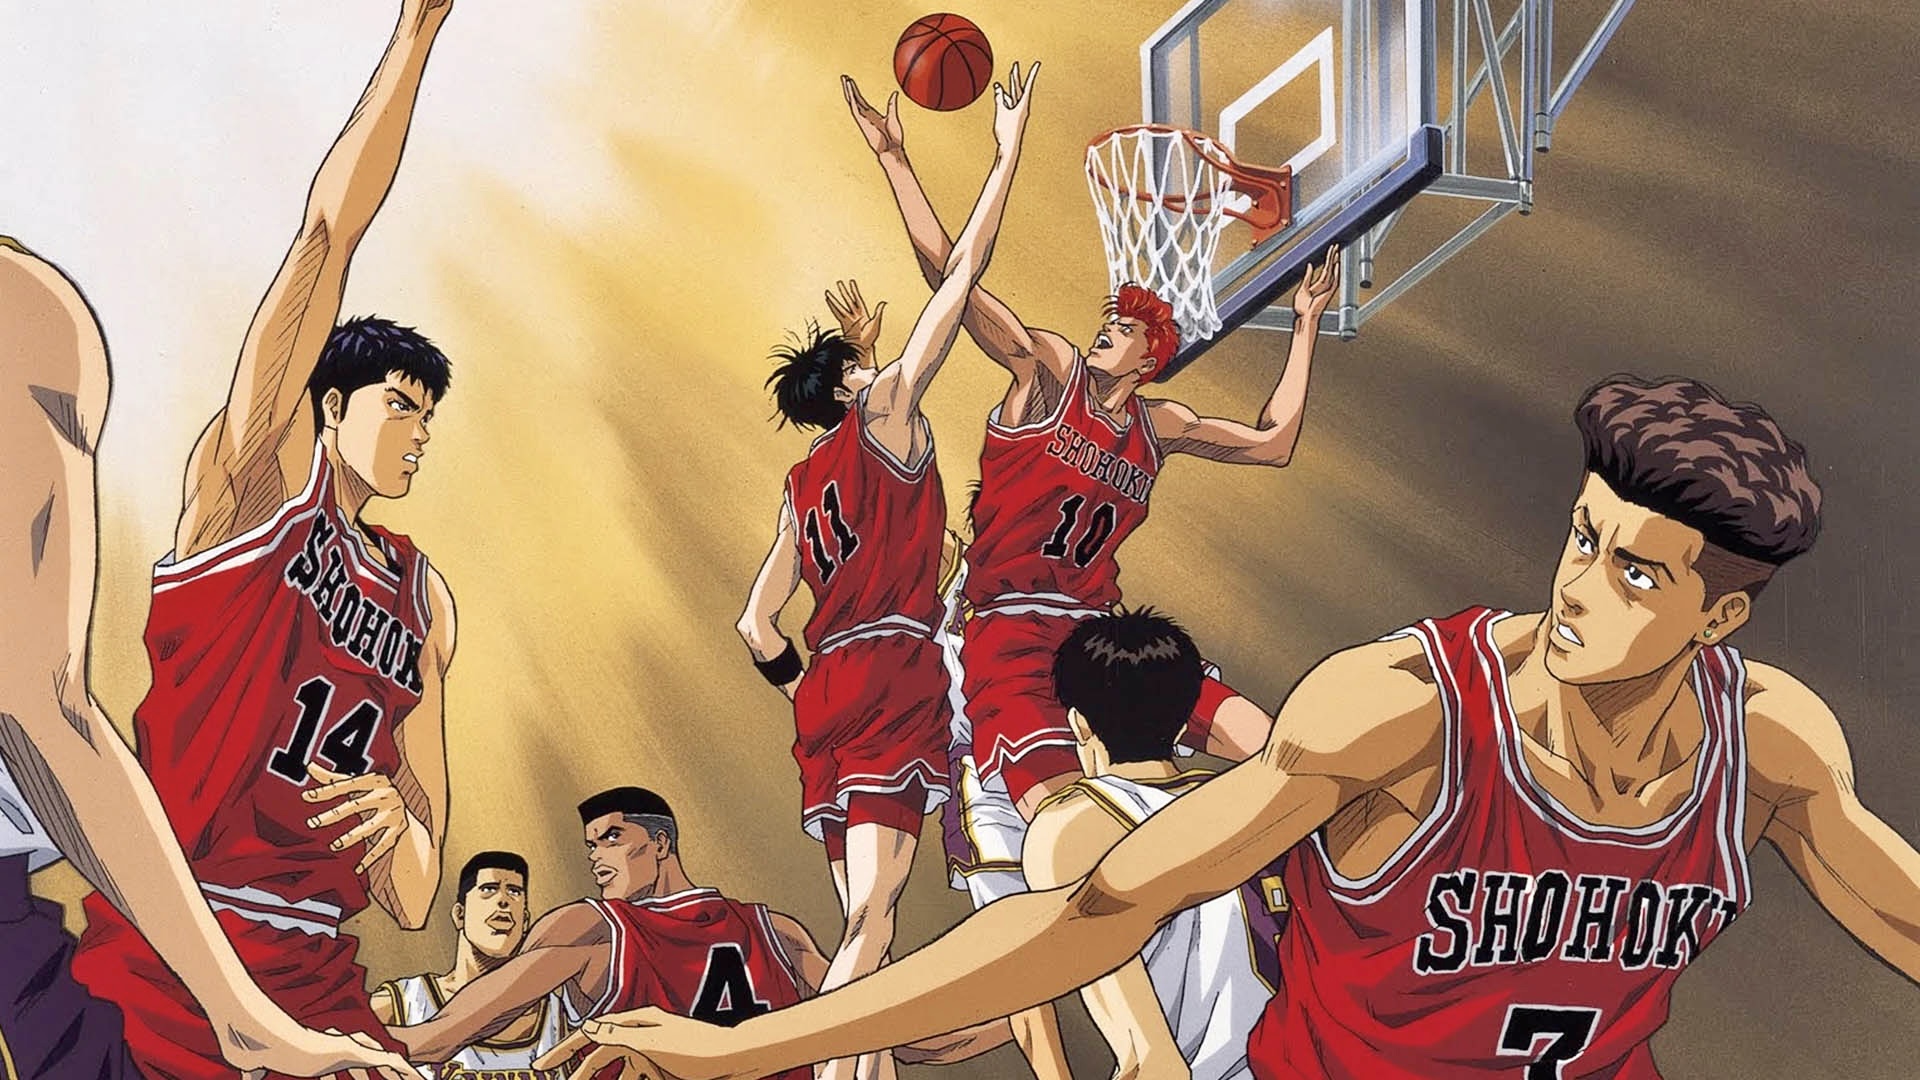 The first slam dunk movie